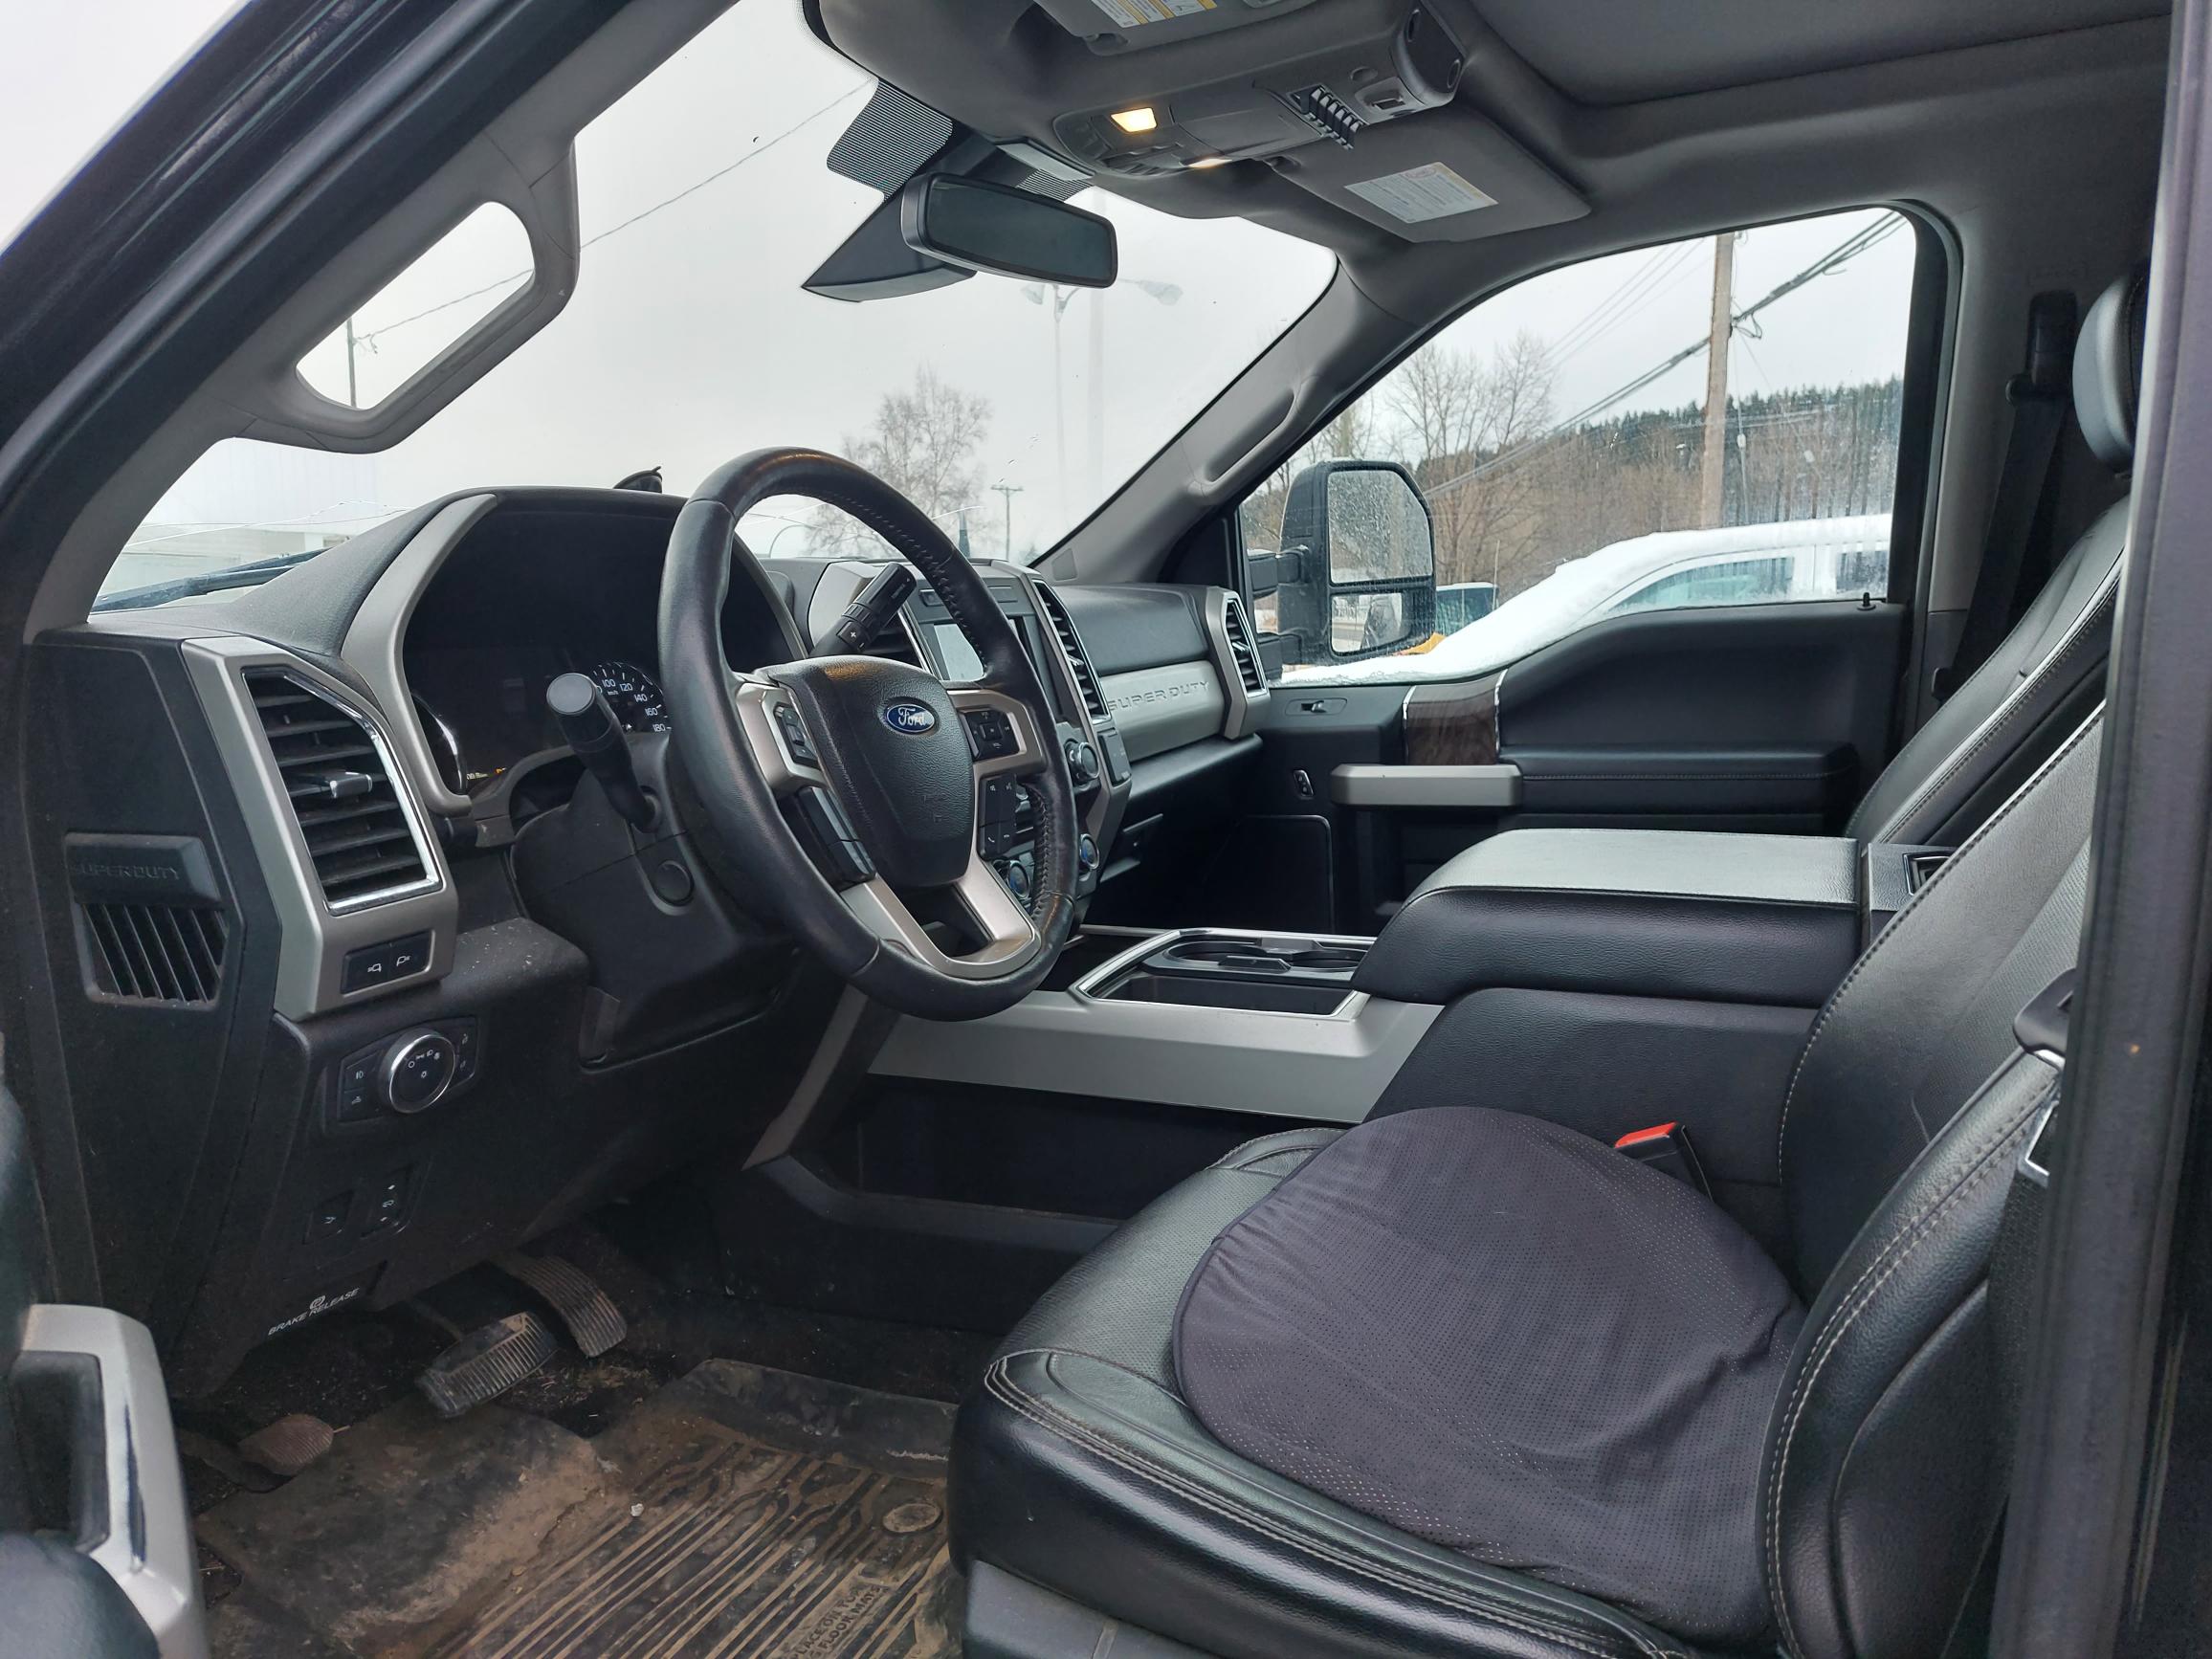 2018 Ford F350 #B-PG-0686 Located in Prince George